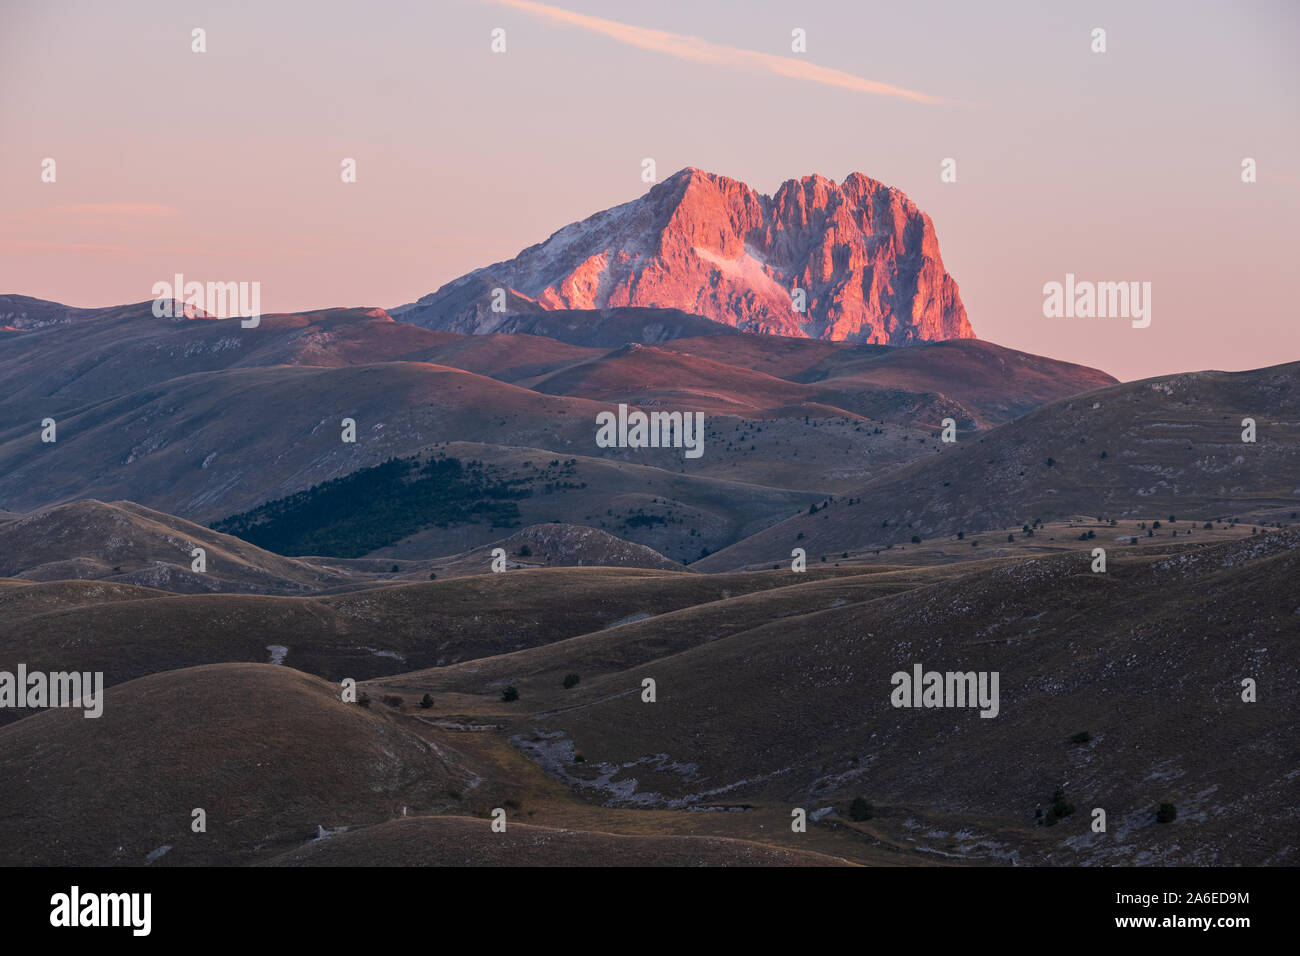 Mountain Corno Grande on horizon behind barren and rural landscape glowing pink in light of sunrise, Abruzzo, Italy Stock Photo